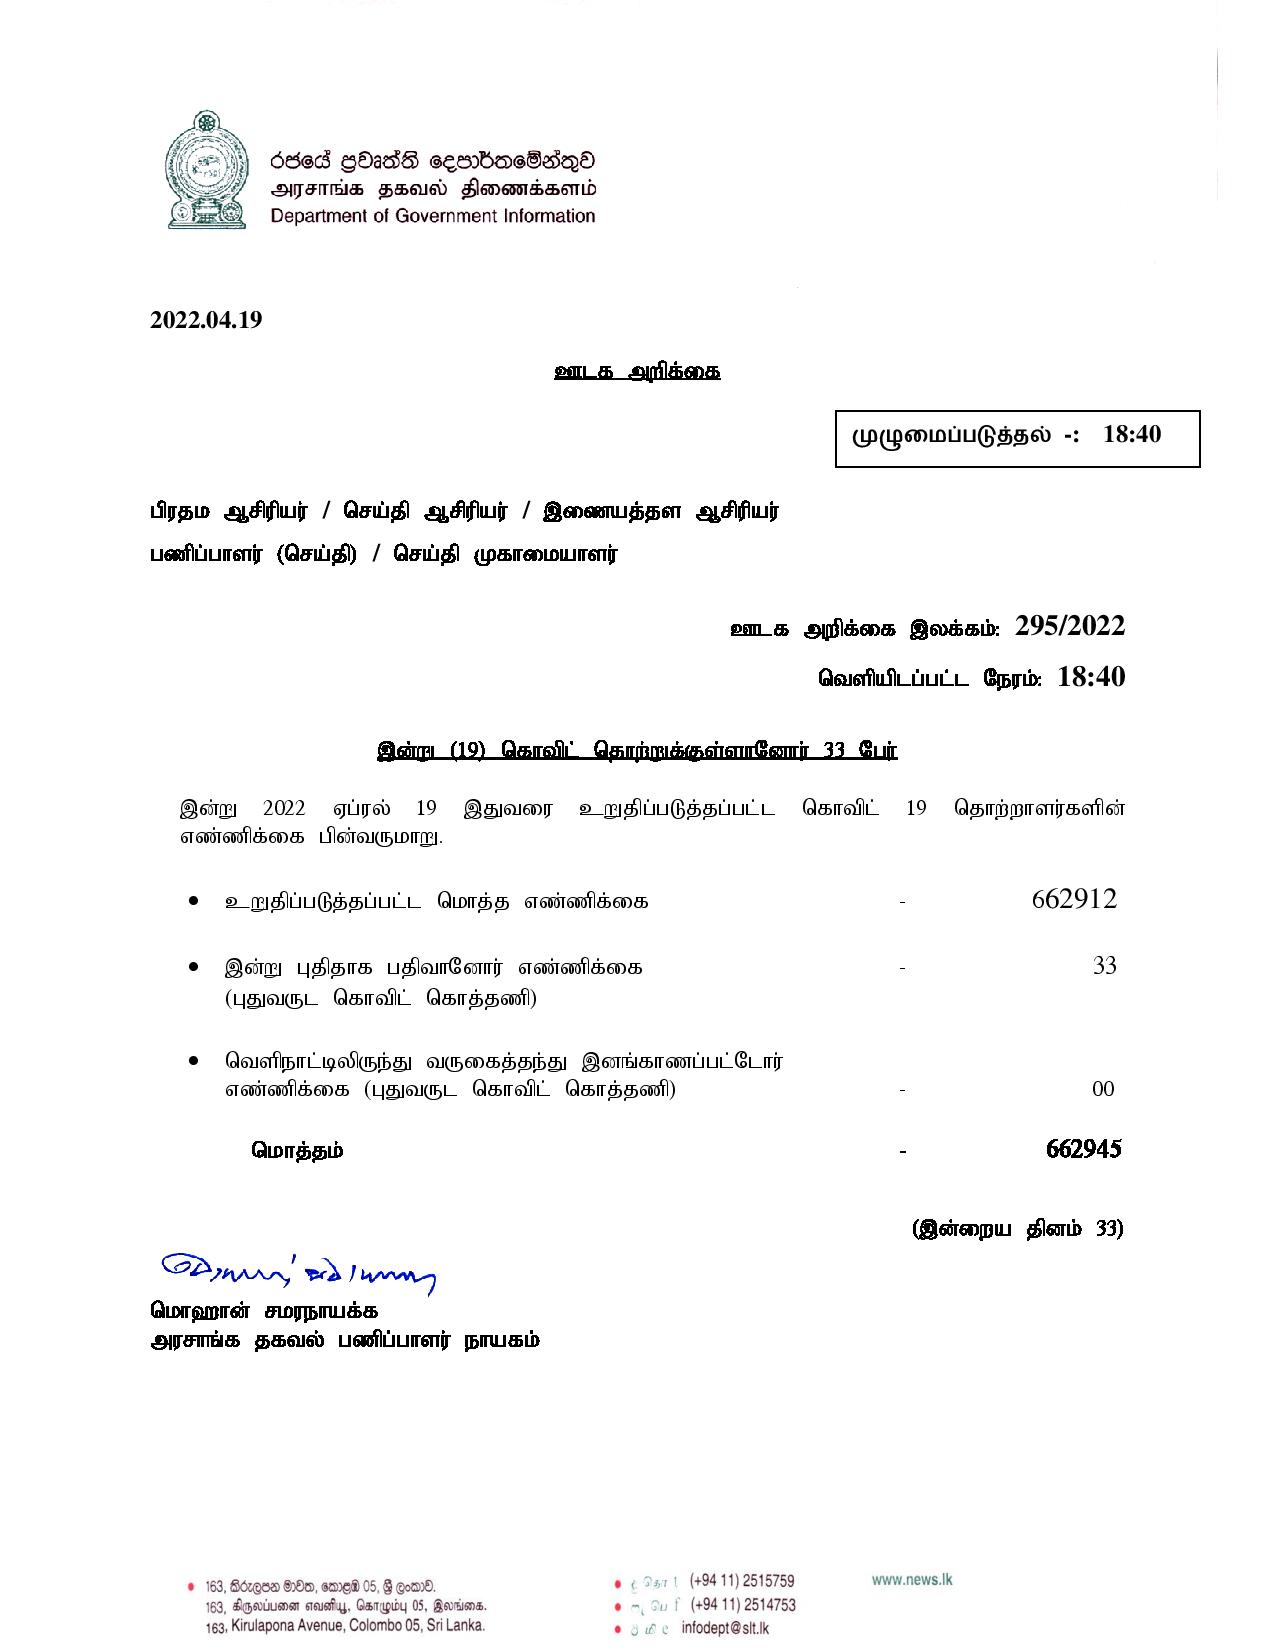 Press Release 295 Tamil page 001